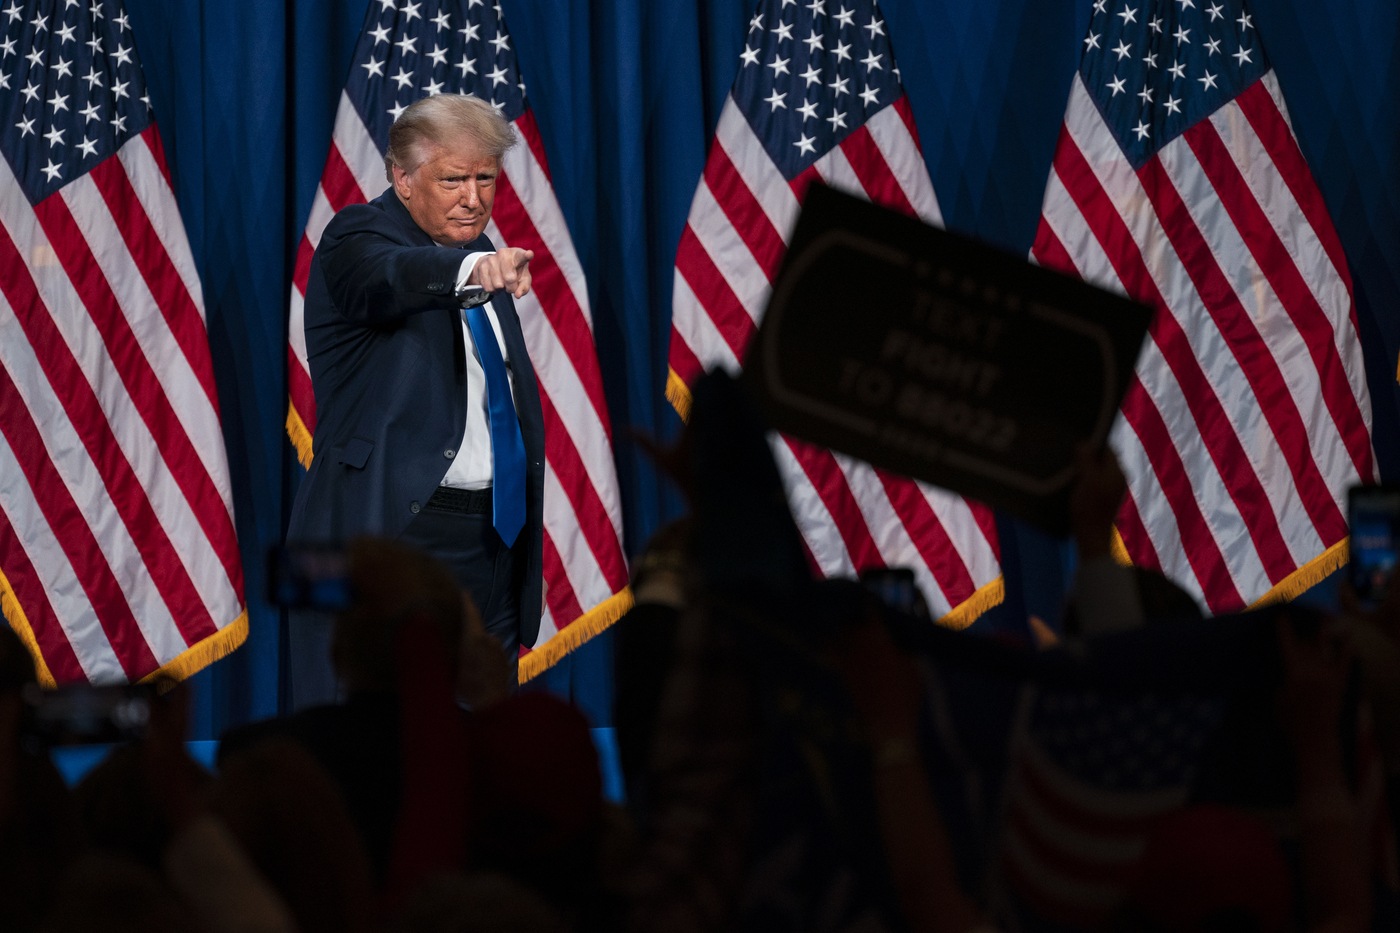 President Donald Trump gestures to the crowd after speaking at Republican National Committee convention, Monday, Aug. 24, 2020, in Charlotte. (AP Photo/Evan Vucci)